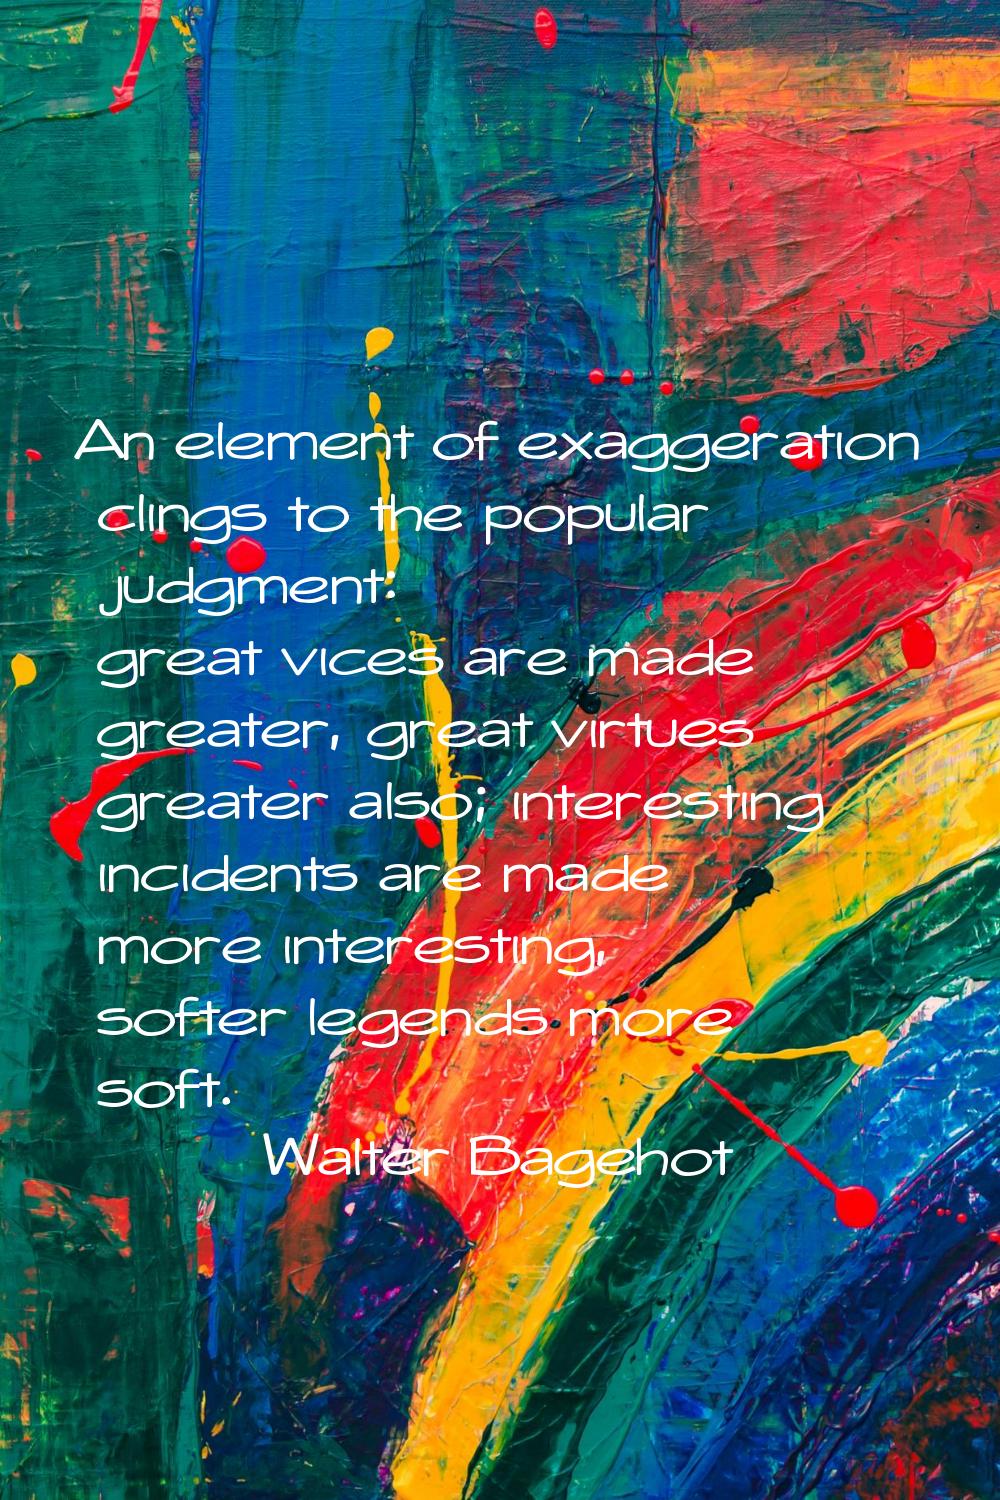 An element of exaggeration clings to the popular judgment: great vices are made greater, great virt